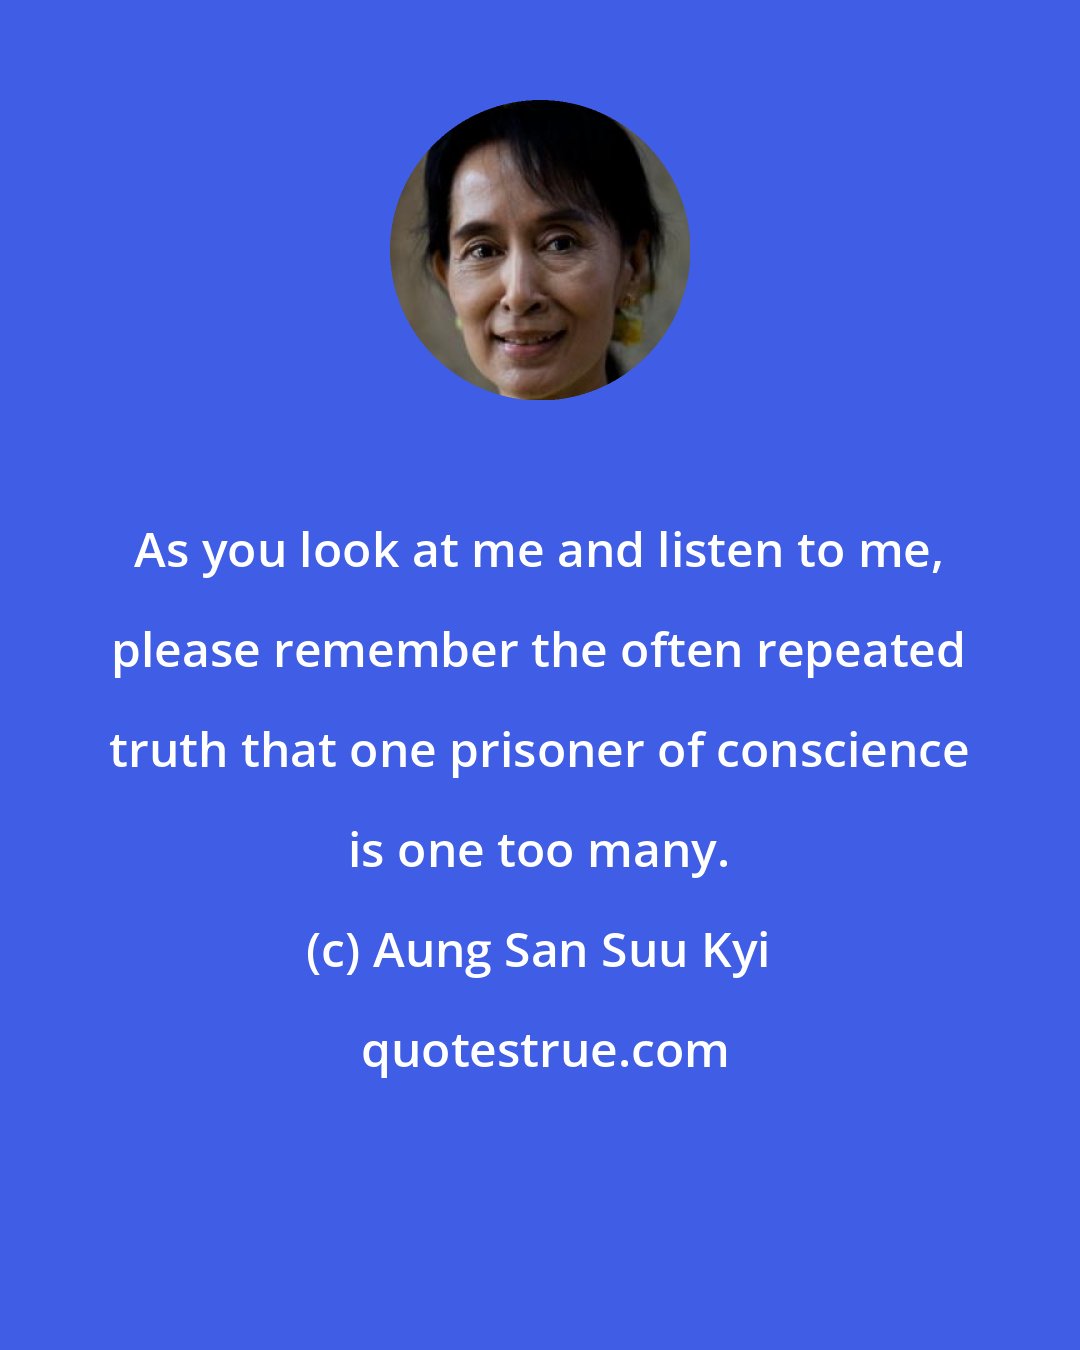 Aung San Suu Kyi: As you look at me and listen to me, please remember the often repeated truth that one prisoner of conscience is one too many.